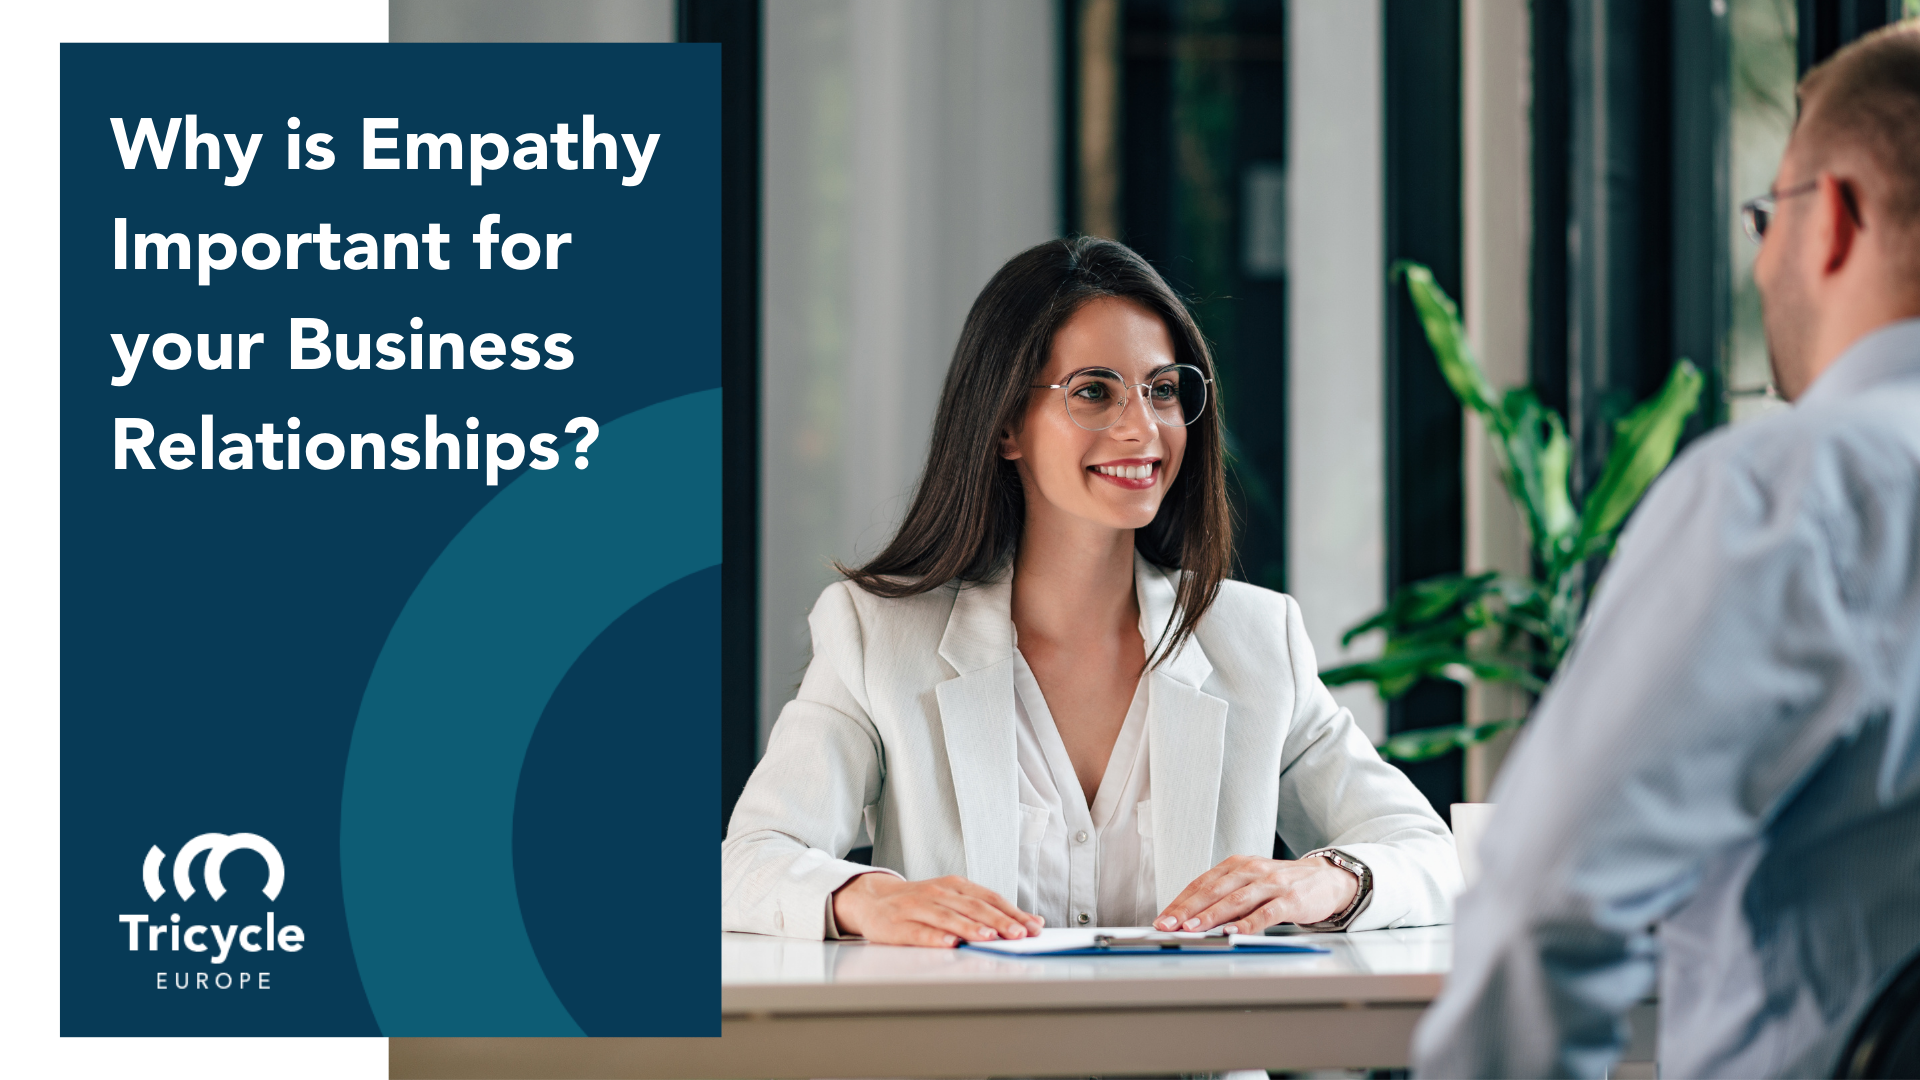 Why is Empathy Important for your Business Relationships?